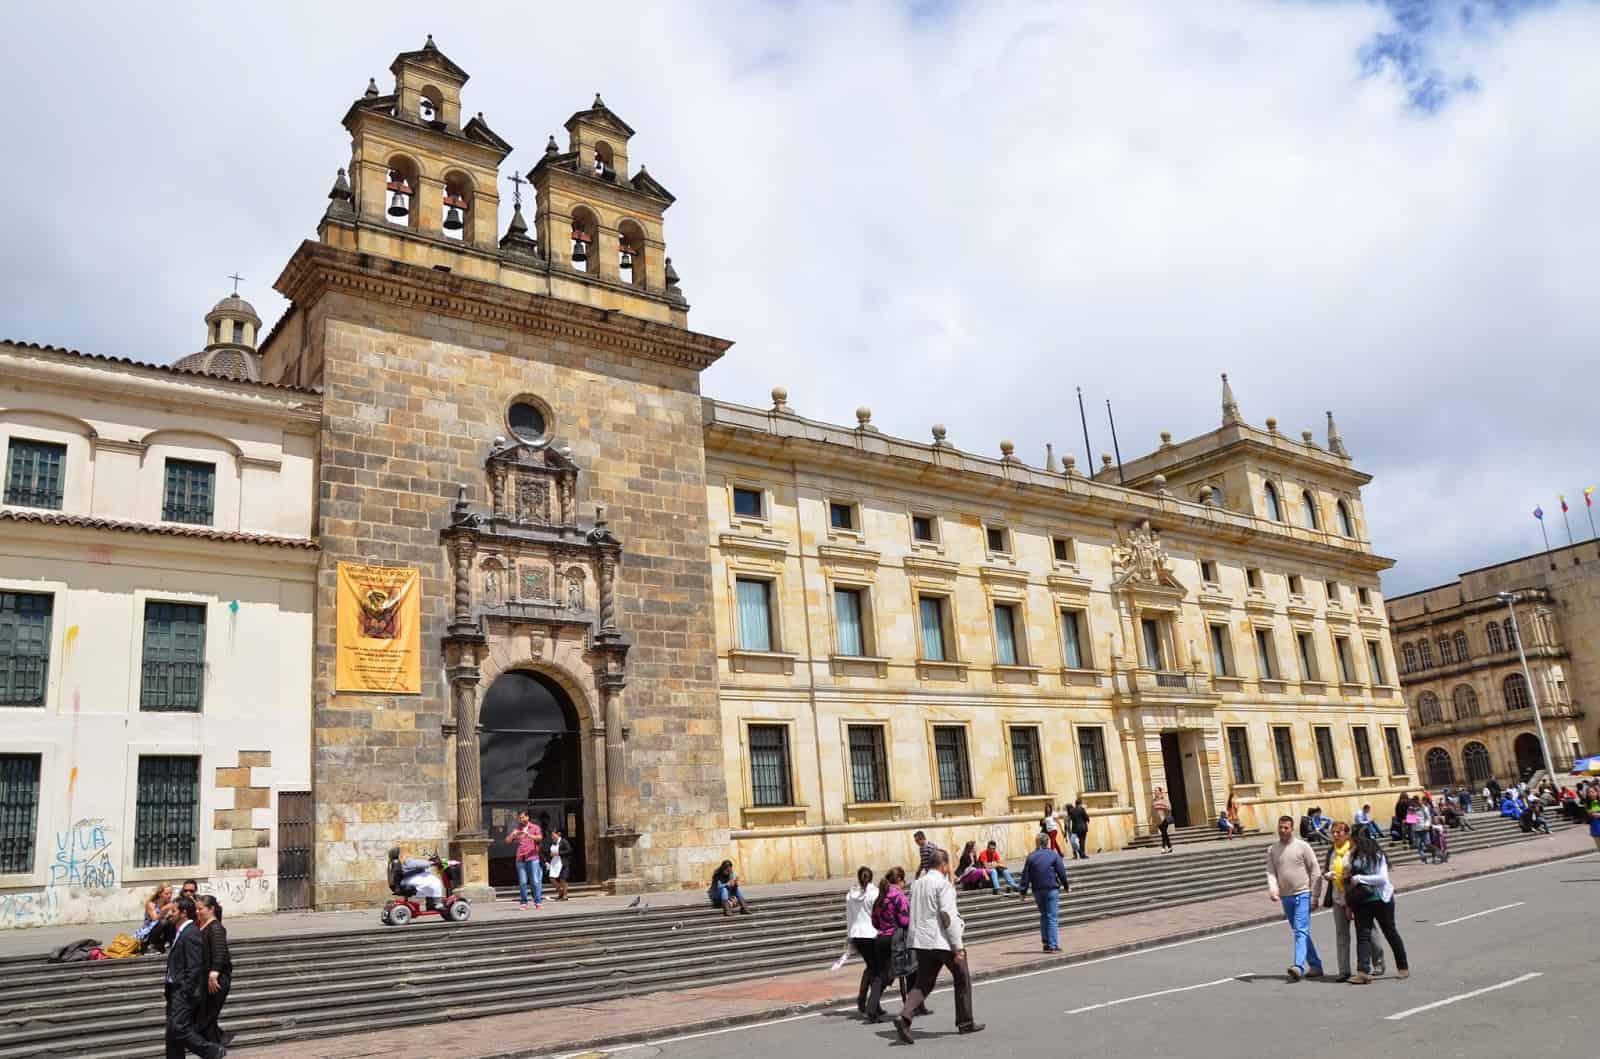 Chapel of the Tabernacle (left) and Cardinal's Palace (right) on Plaza de Bolívar, La Candelaria, Bogotá, Colombia